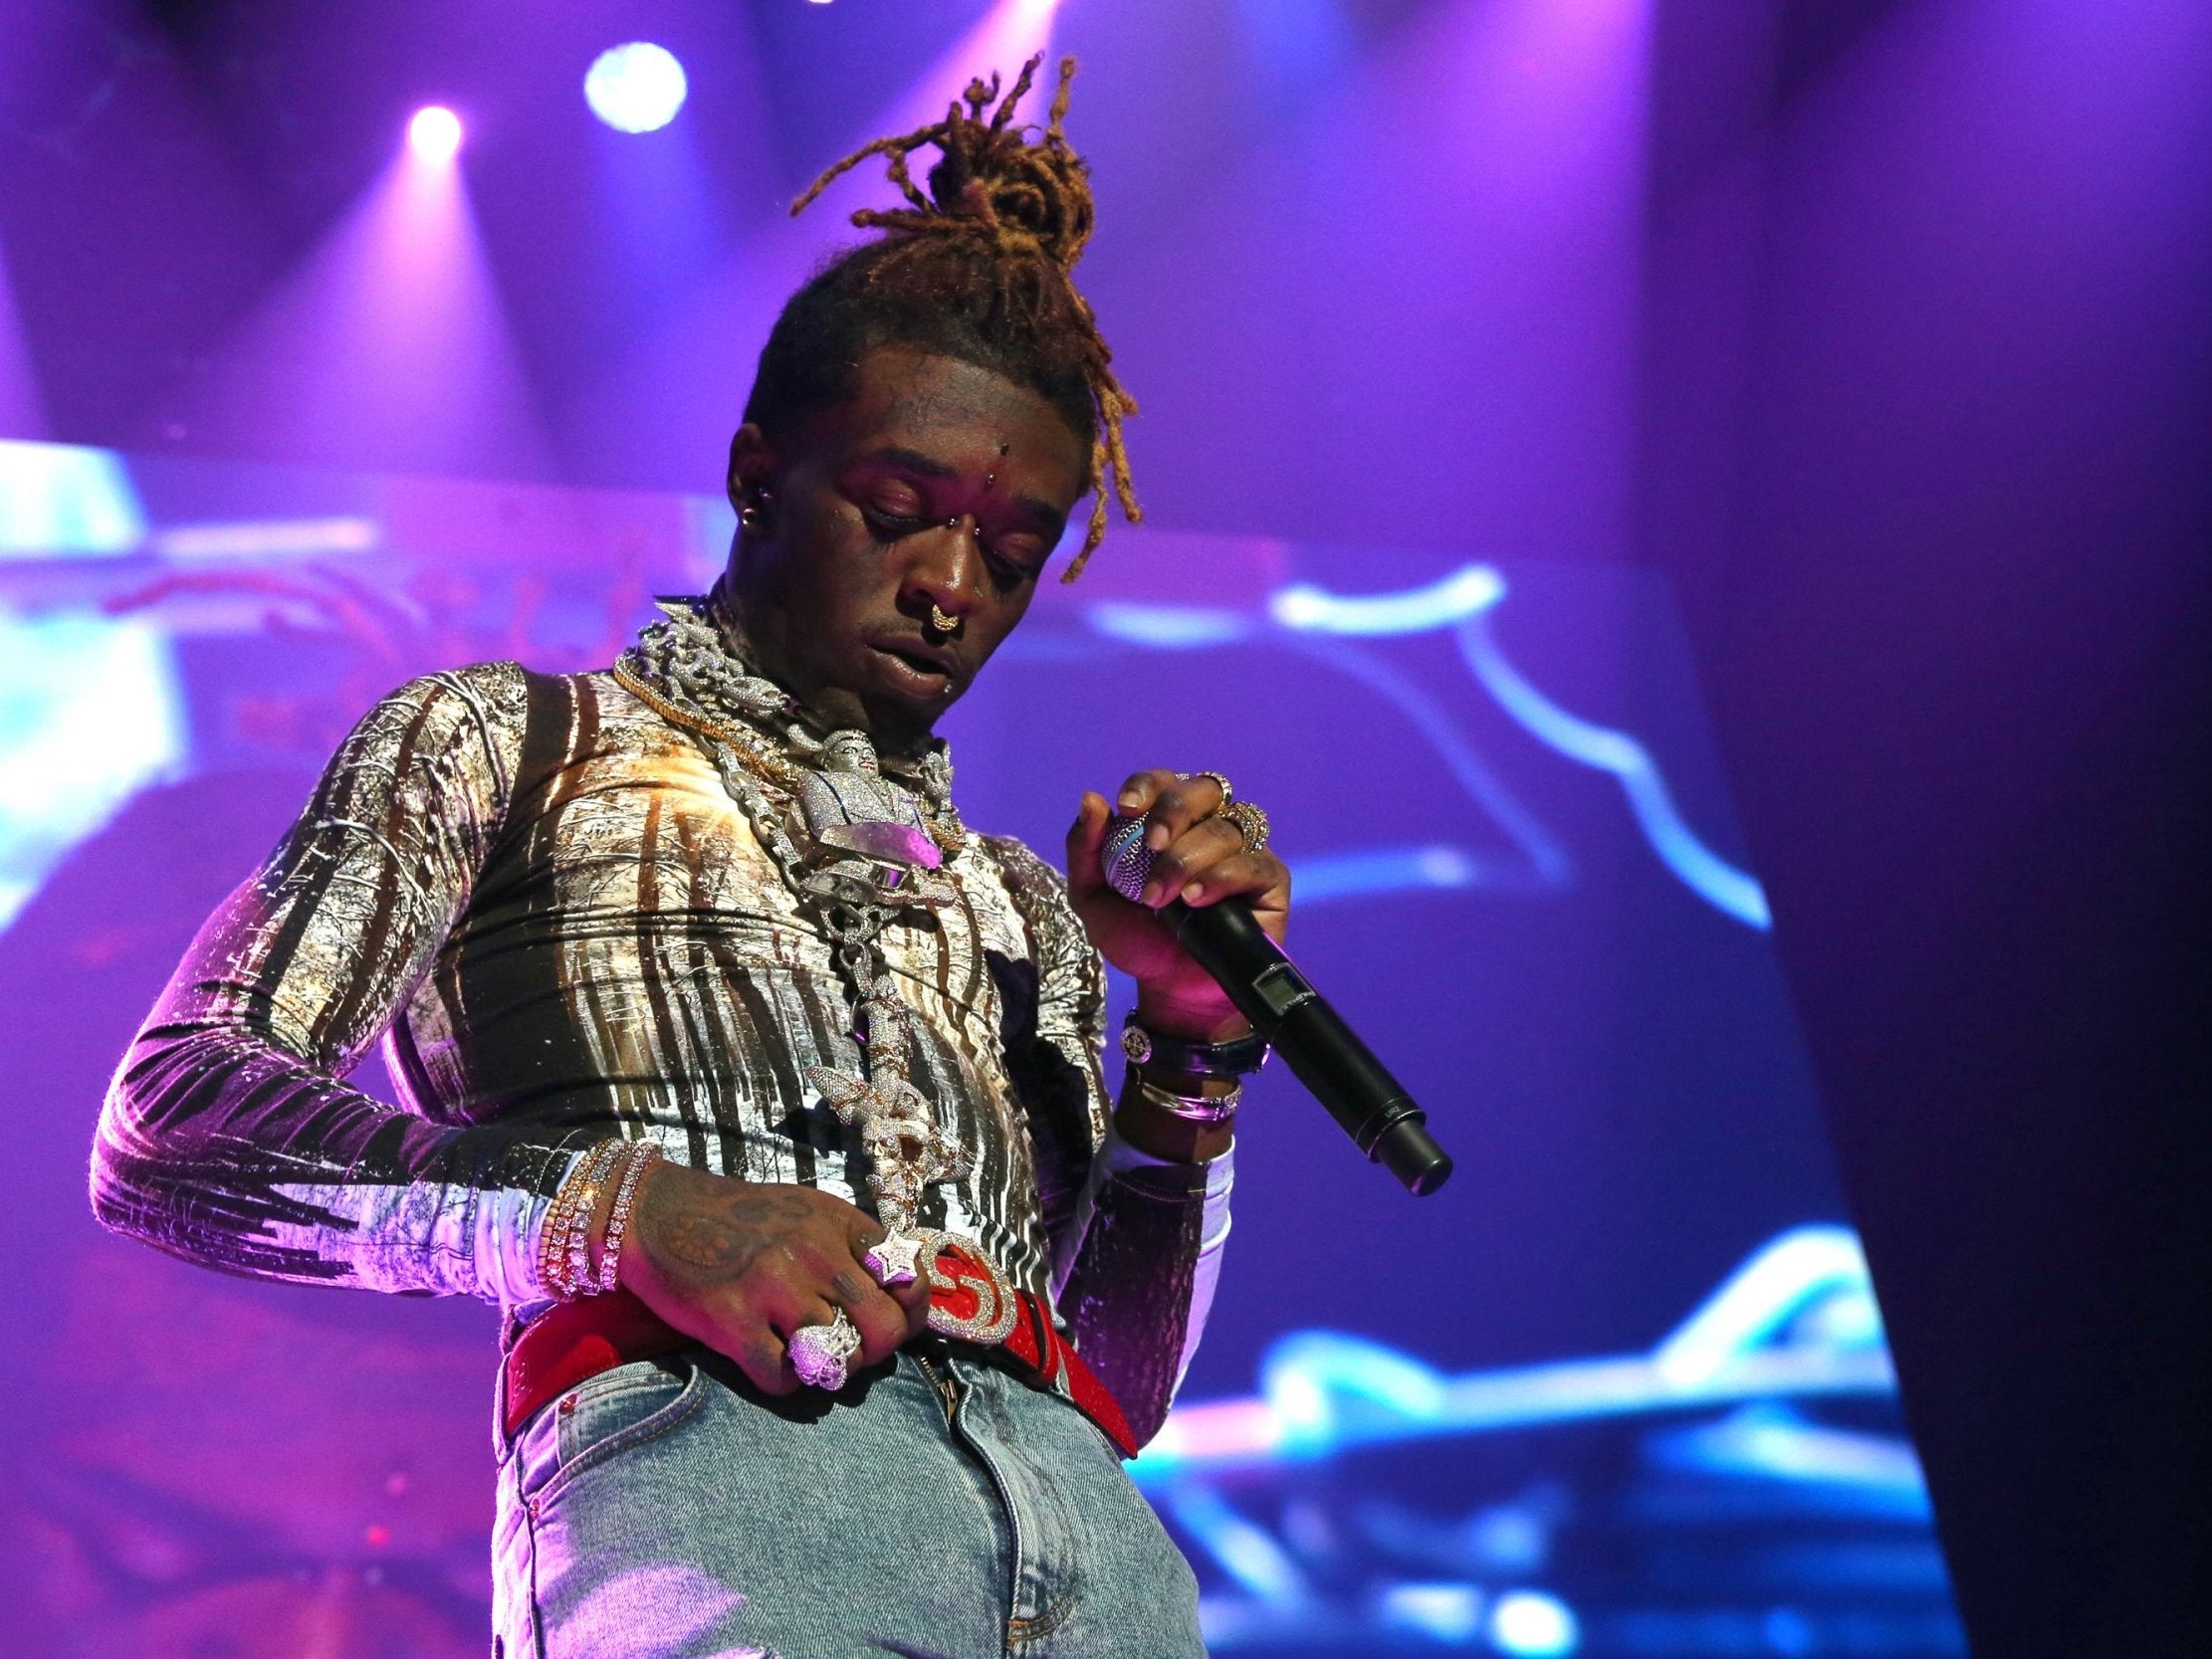 Lil Uzi Vert Announces He S Done With Music The Independent The Independent - xo tour llif3 lil uzi vert roblox music video pc